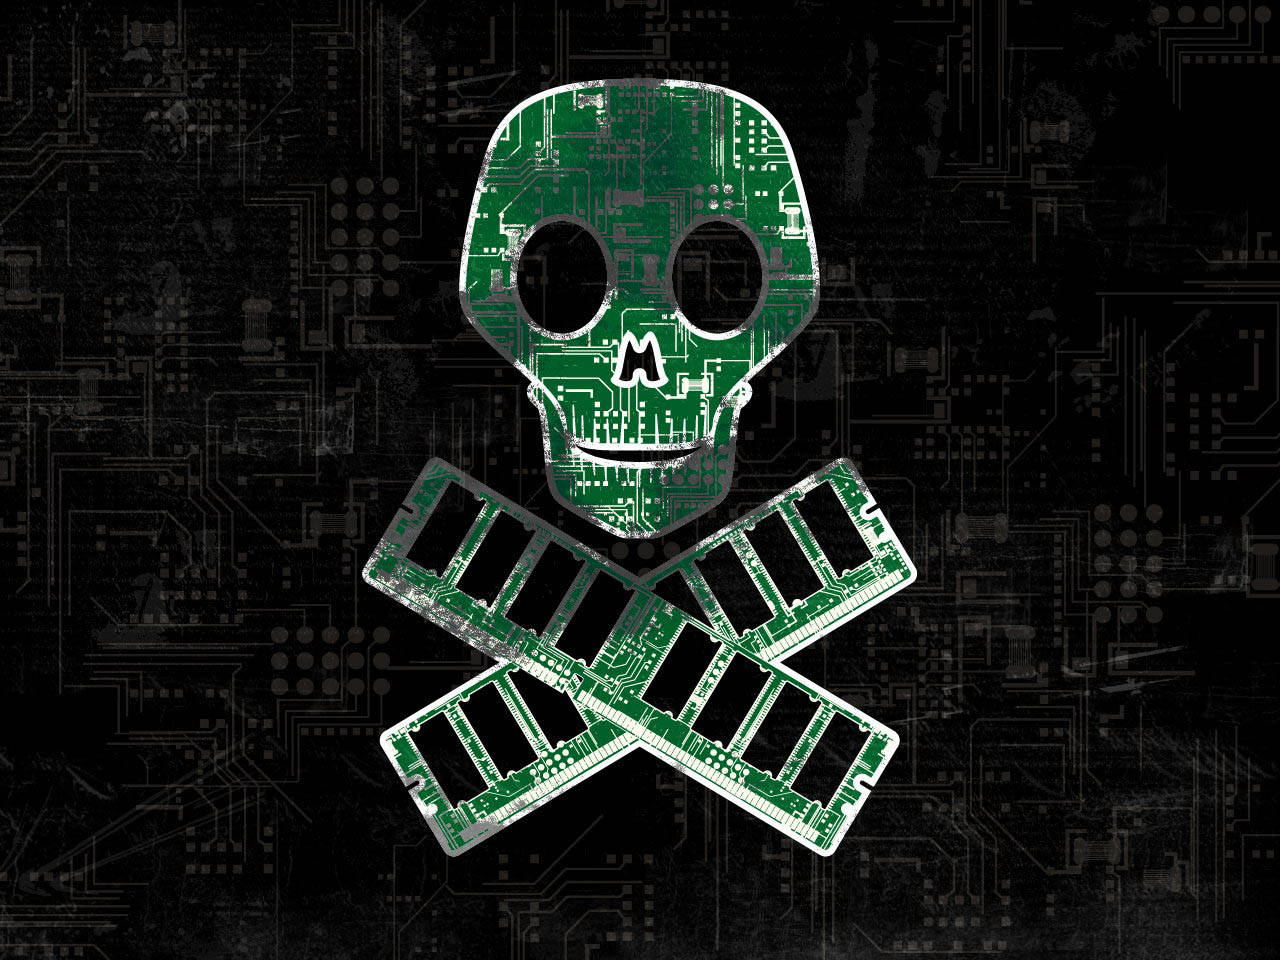 “a Hacker’s Calling Card – A Poison Skull Symbolizes Disruption” Background